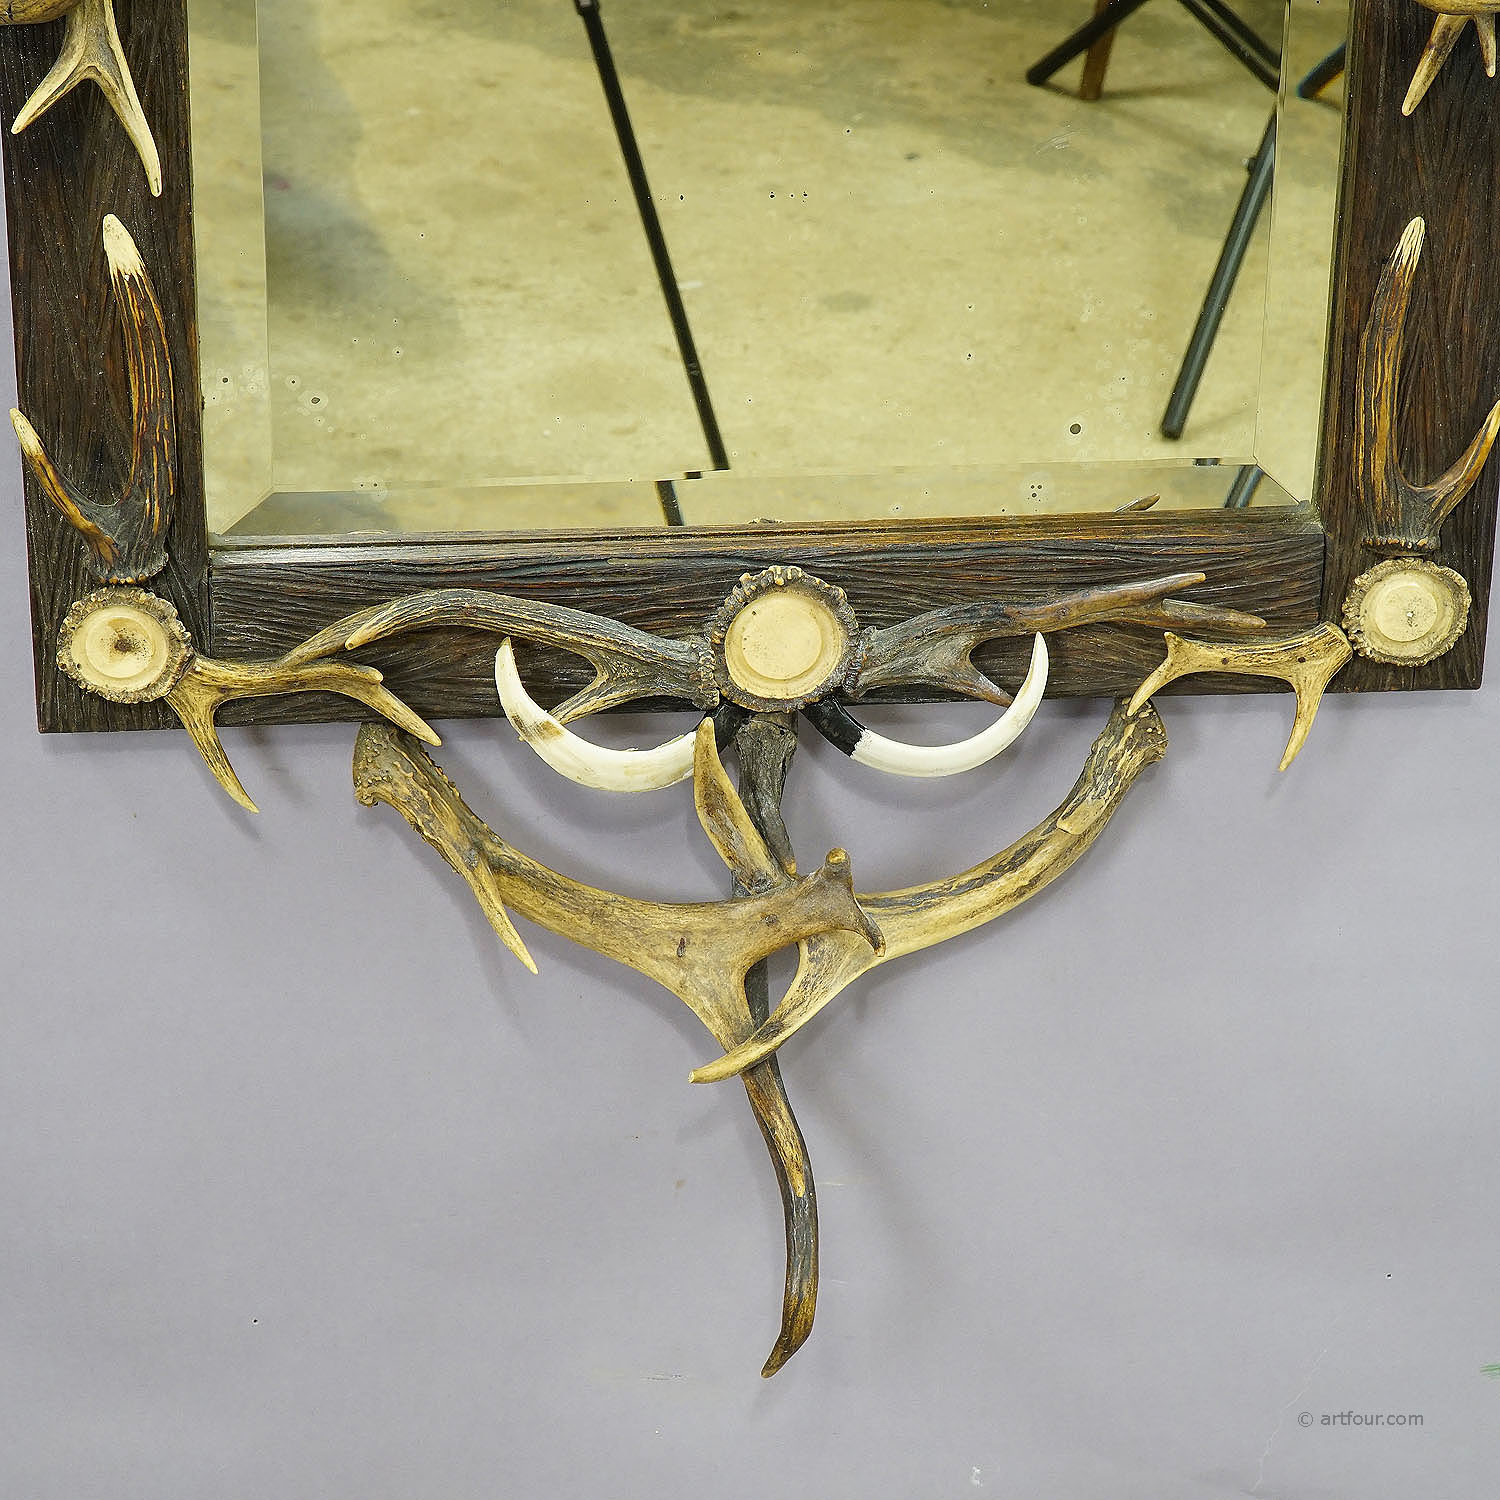 Large Antique Mirror with Rustic Antler Decorations